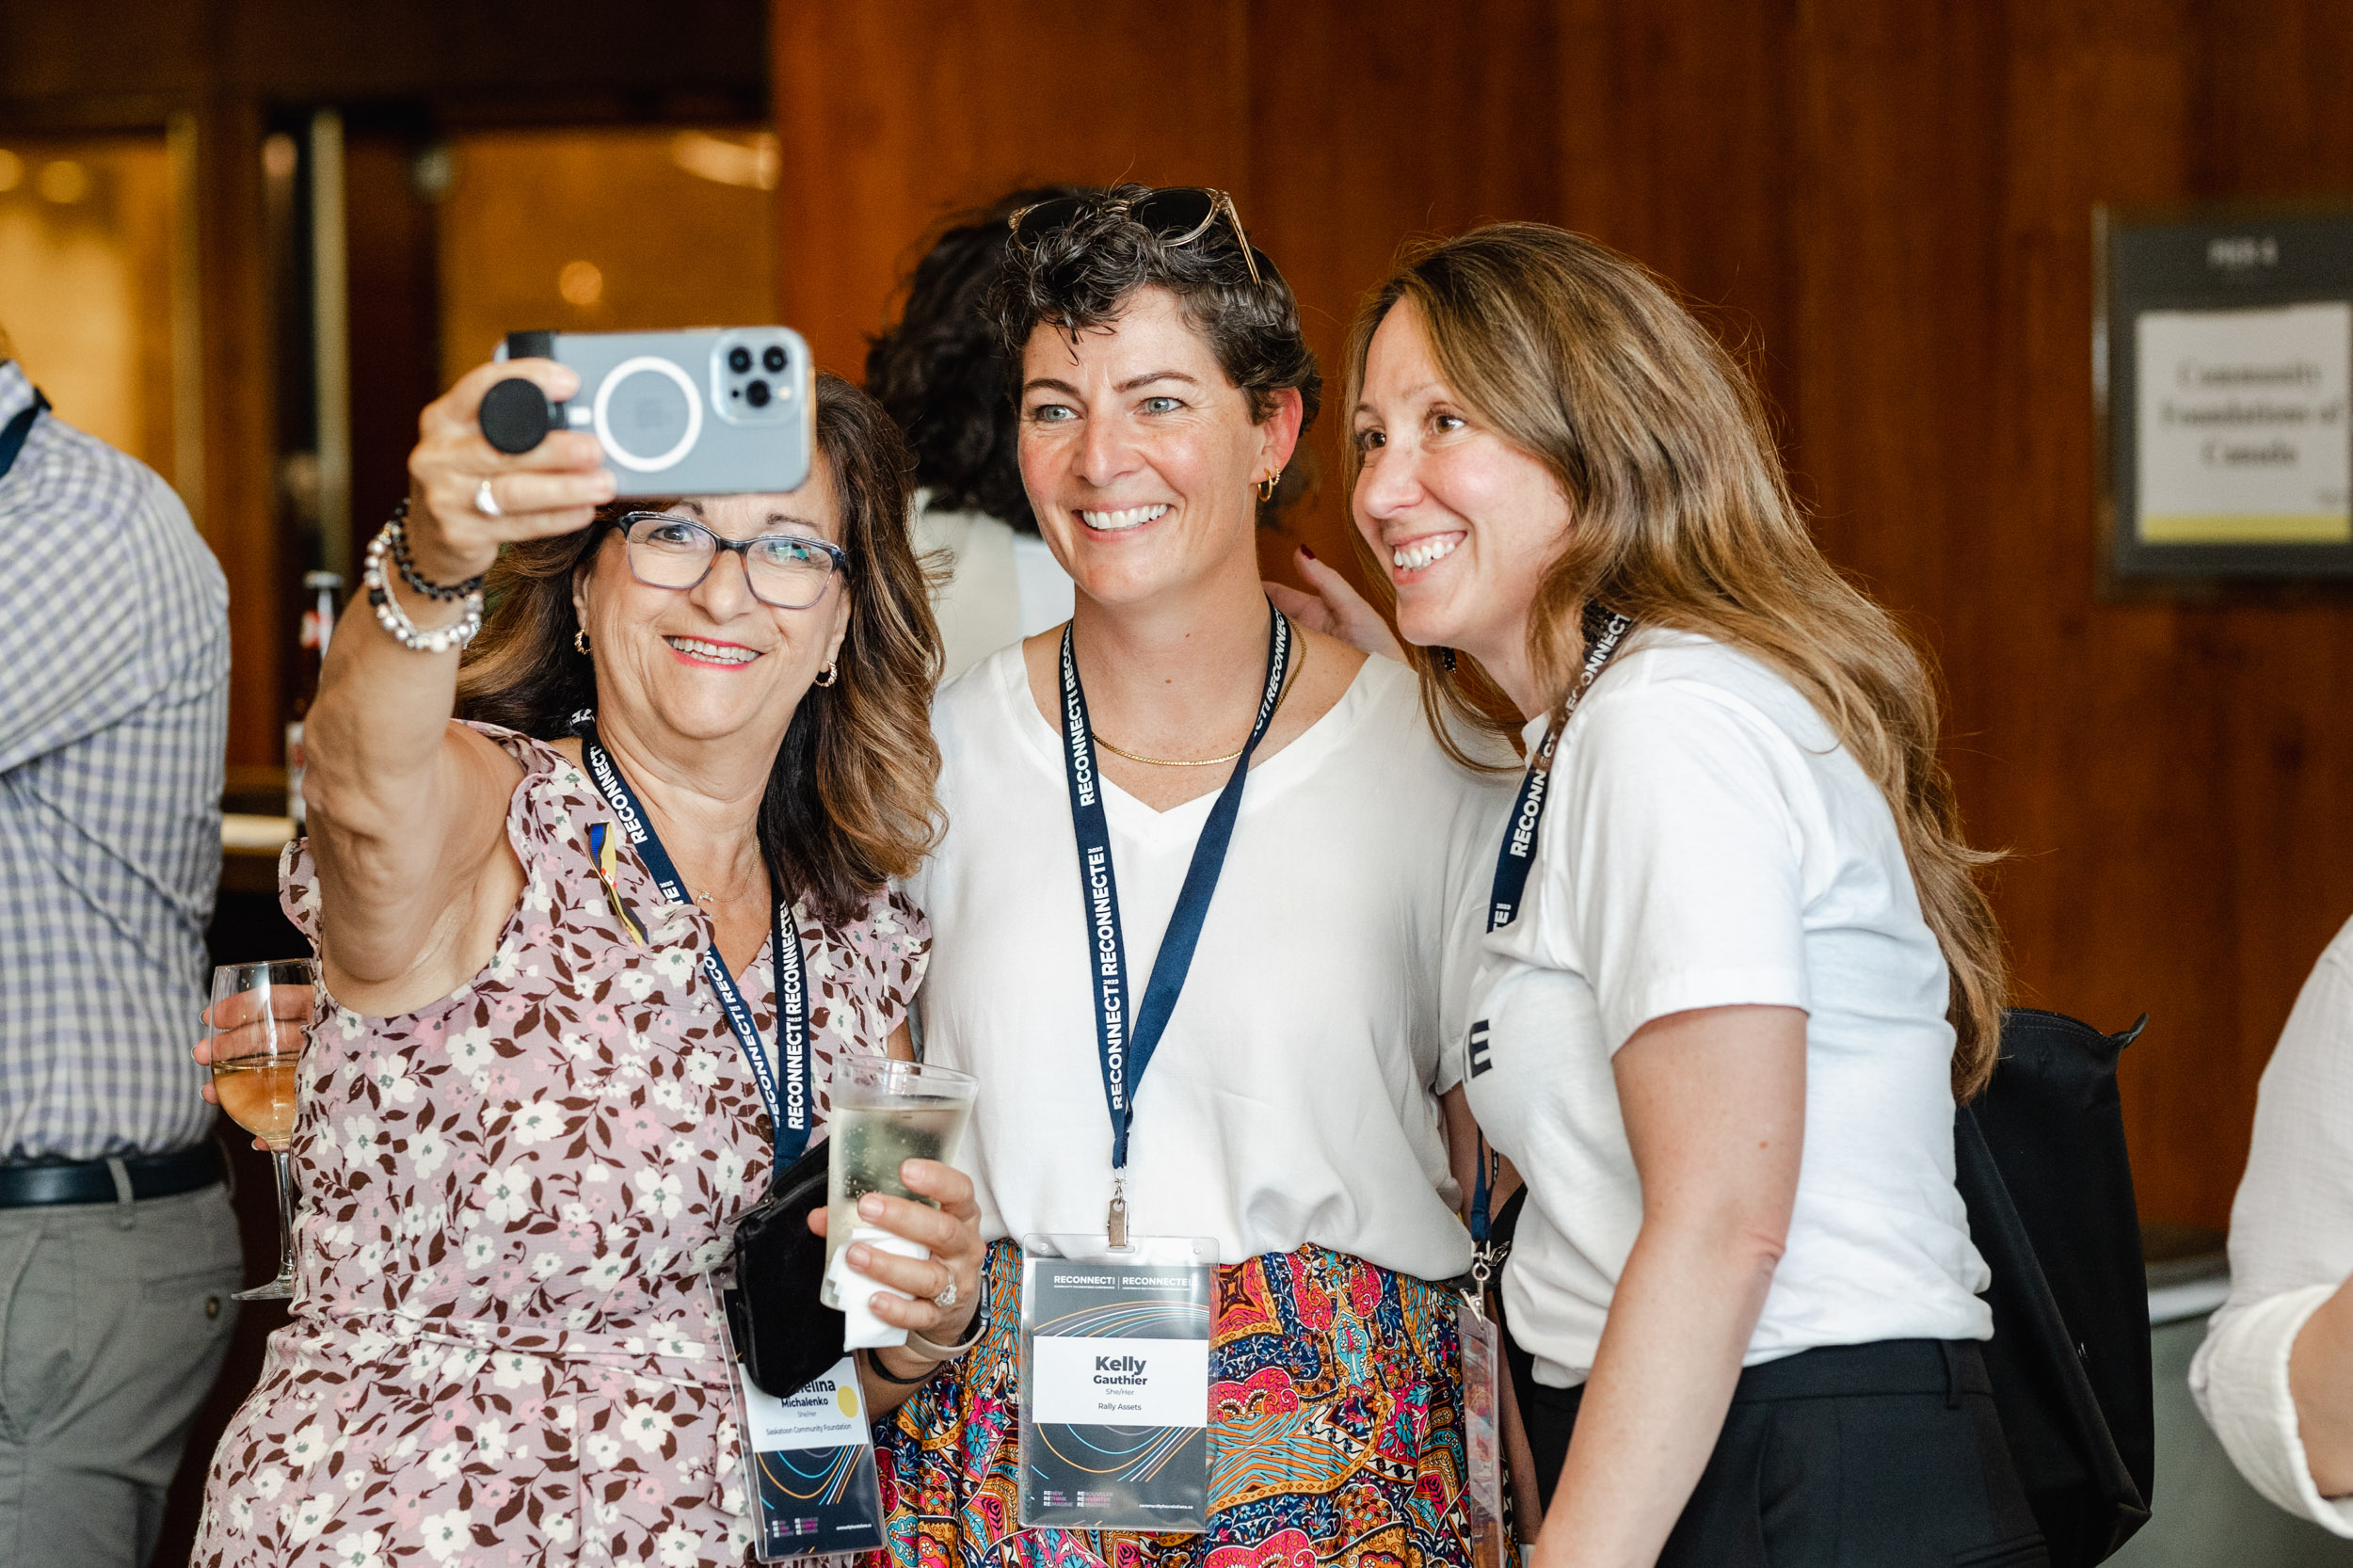 Three women snapping a selfie at a conference.